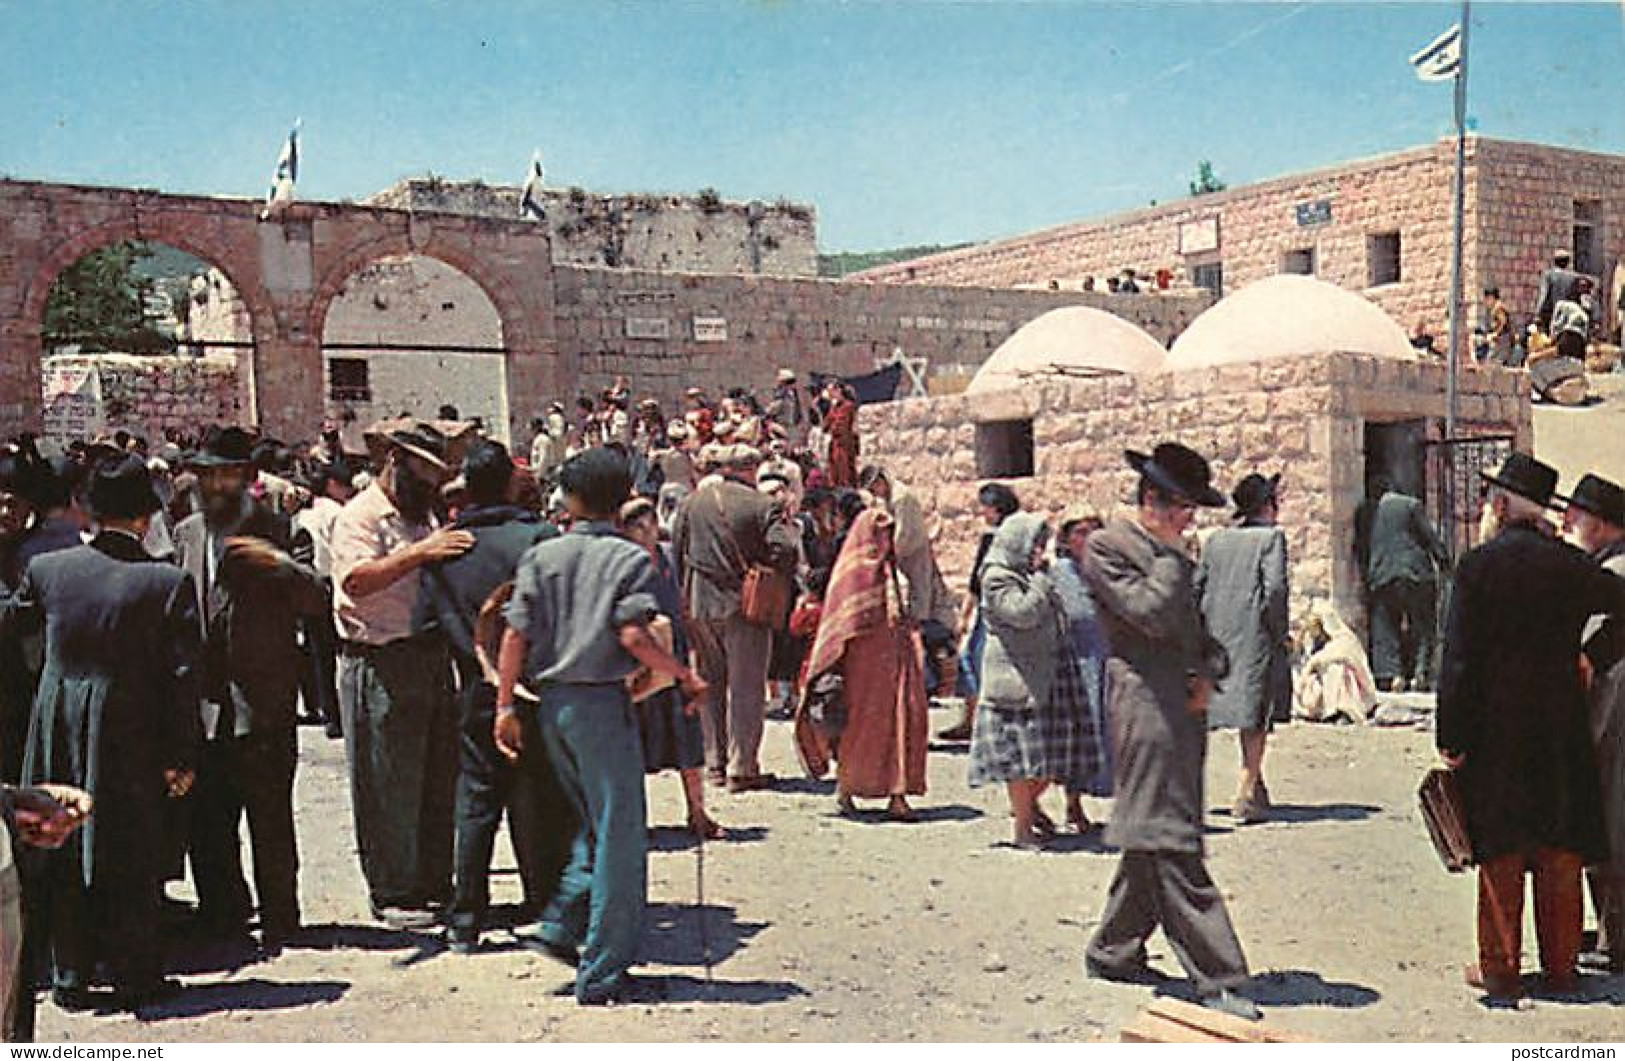 Israel - MERON - Entrance To The Synagogue - Publ. Palphot 5450 - Israel